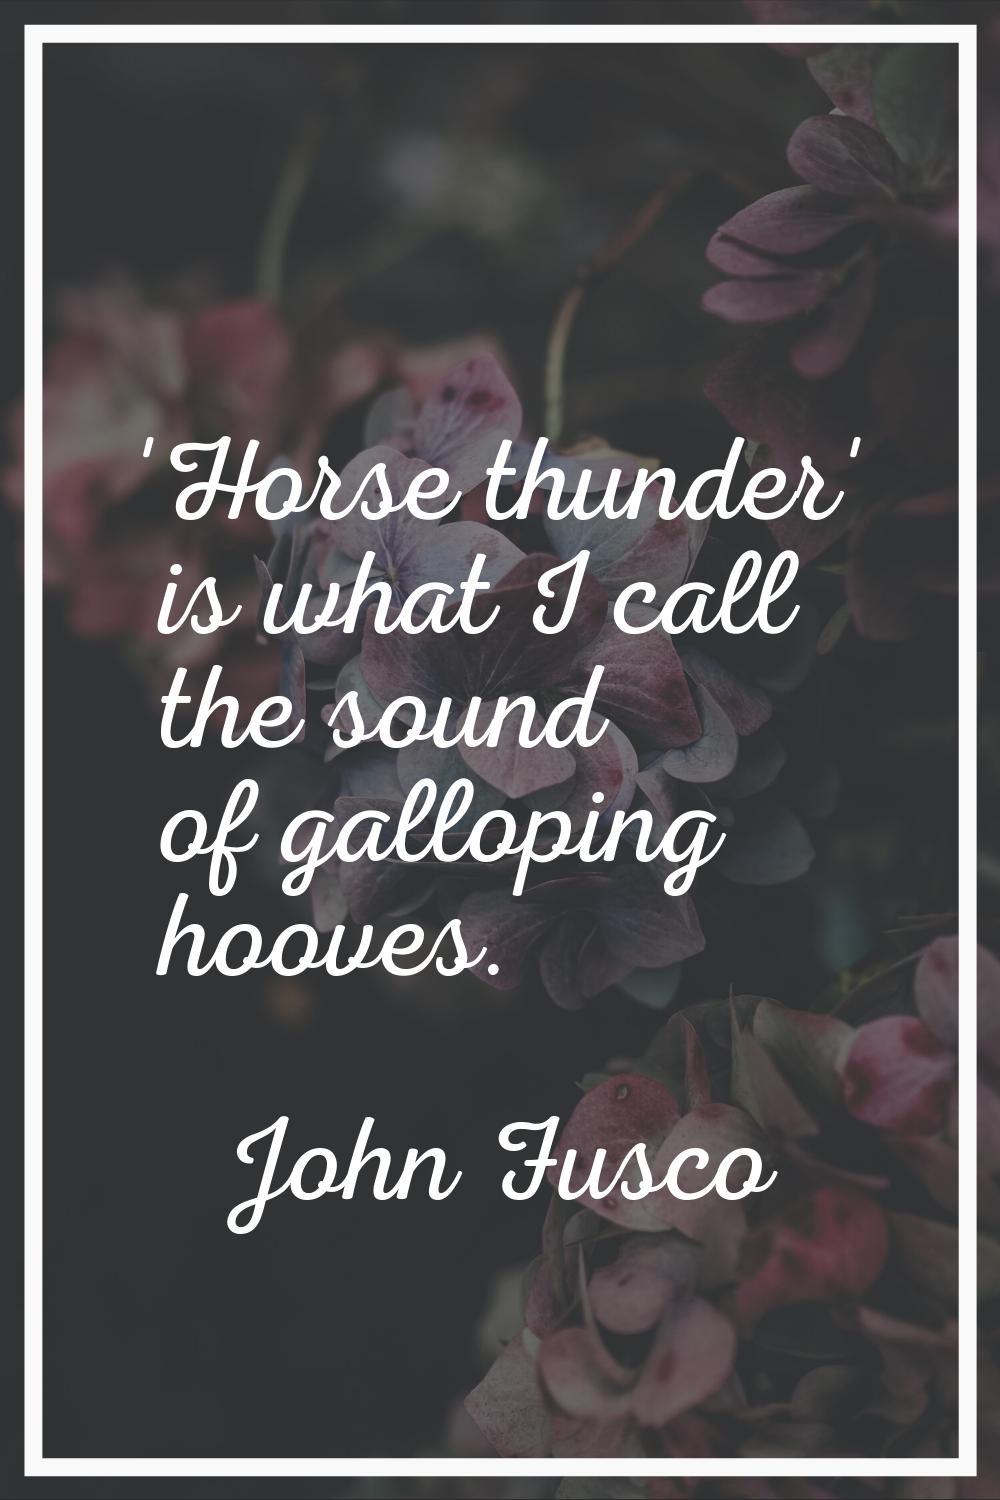 'Horse thunder' is what I call the sound of galloping hooves.